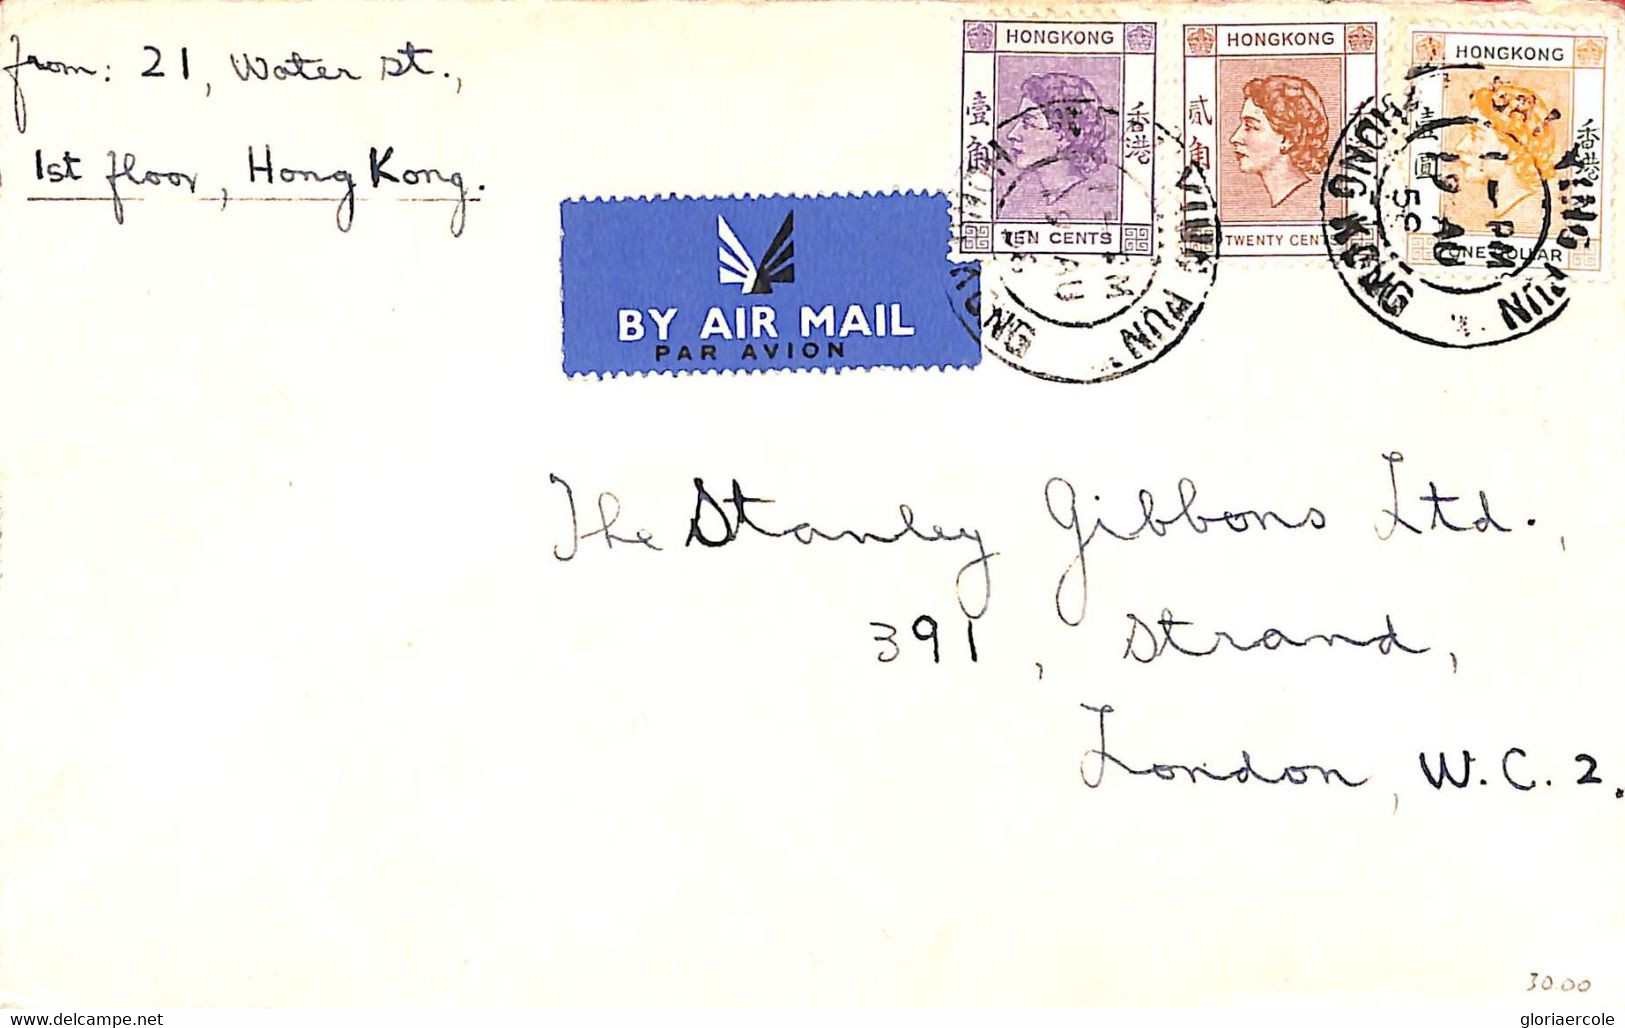 Aa6804 - HONG KONG - POSTAL HISTORY -  COVER From SAI YUNG PUN To ENGLAND 1958 - Covers & Documents